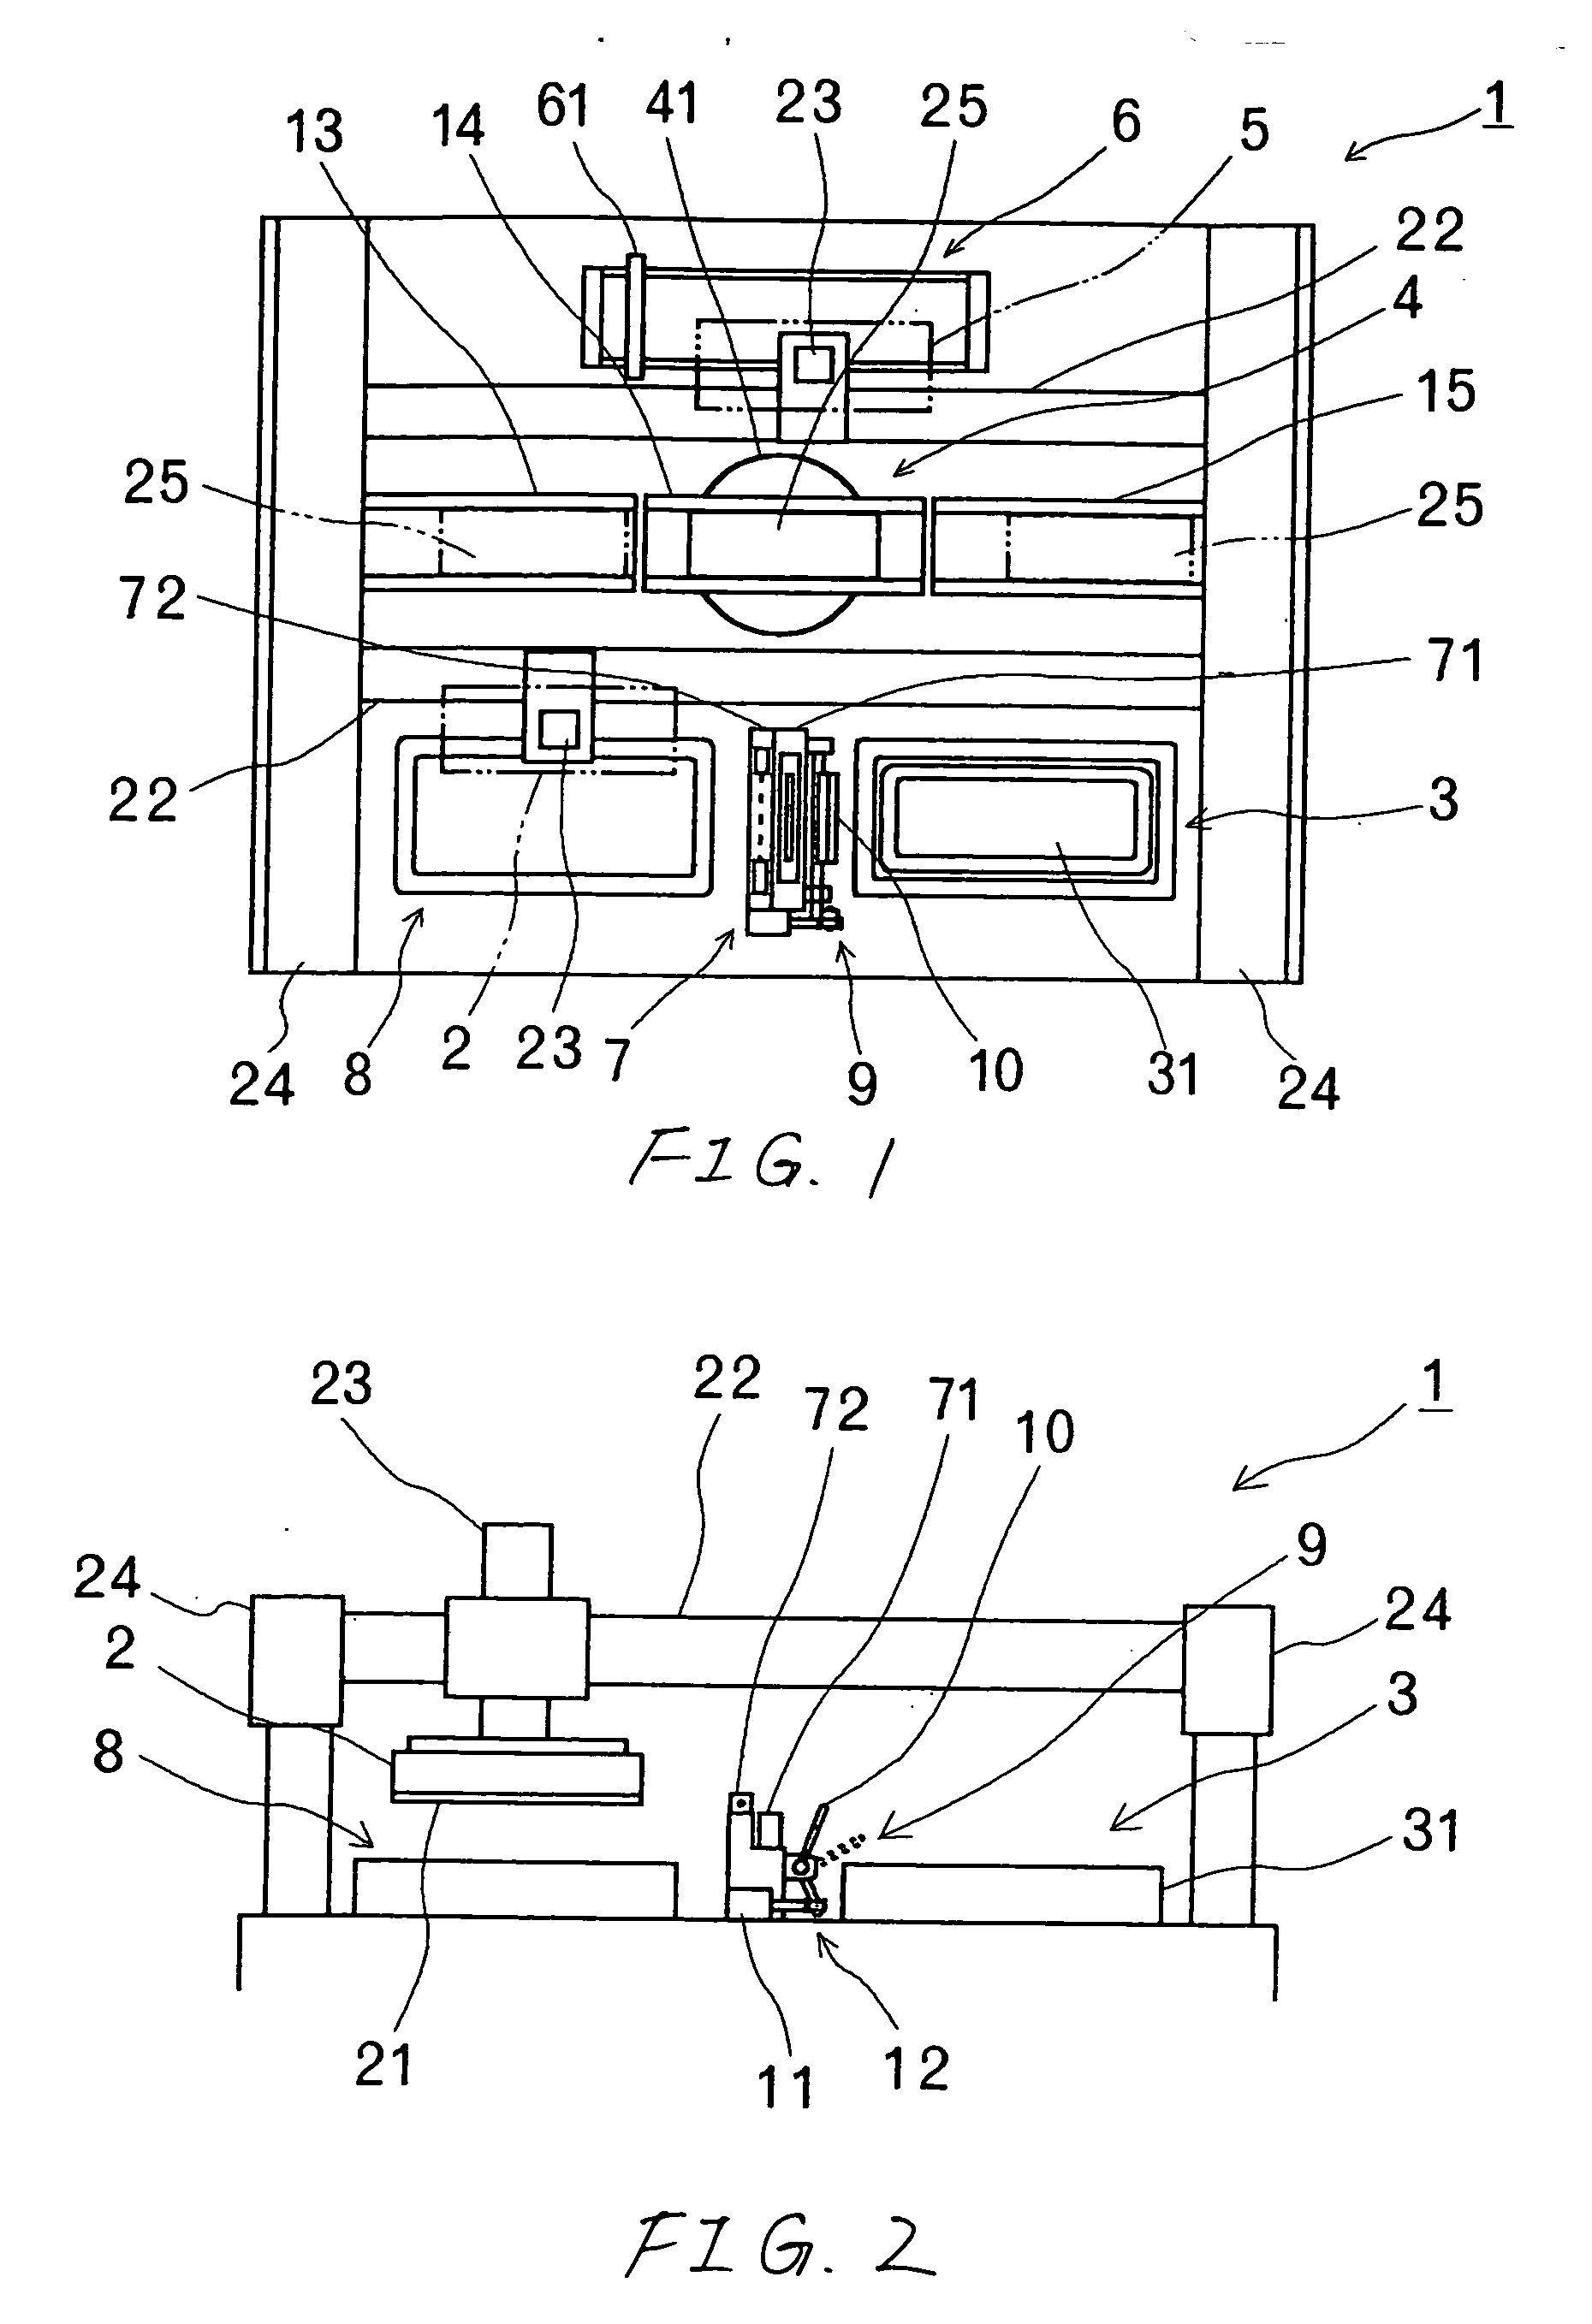 Conductive ball mounting method, and apparatus therefor